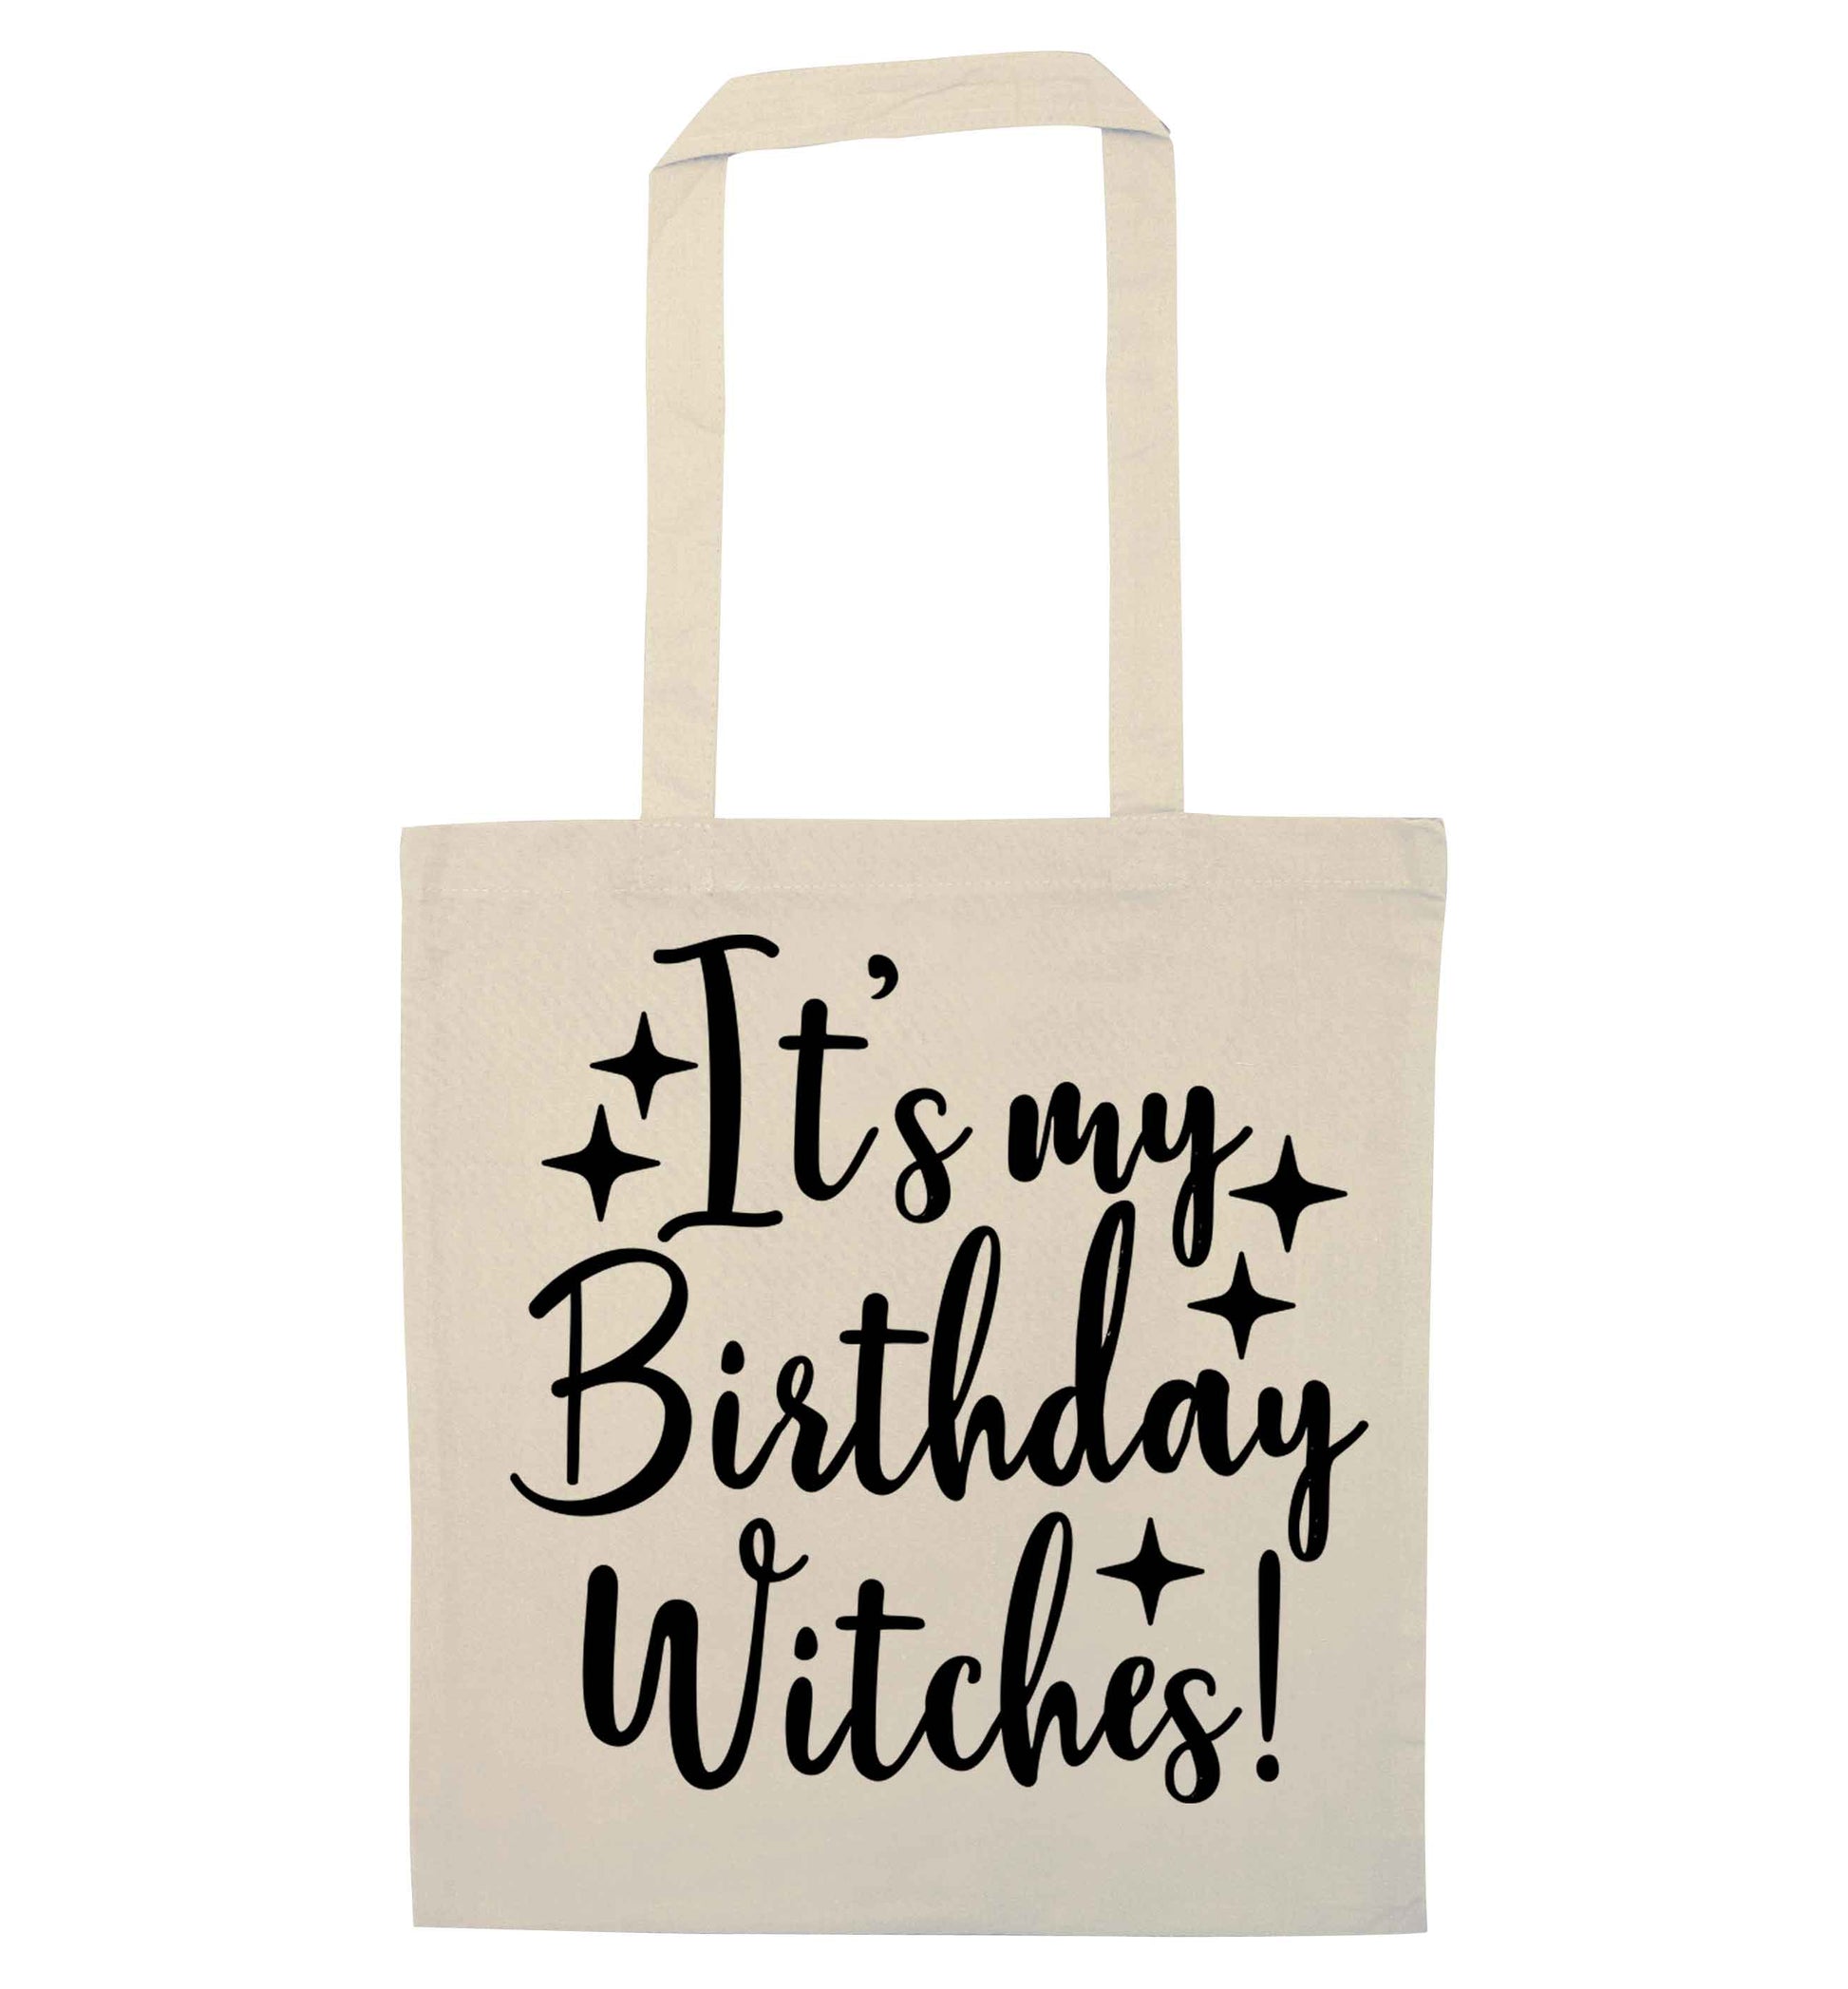 It's my birthday witches!natural tote bag